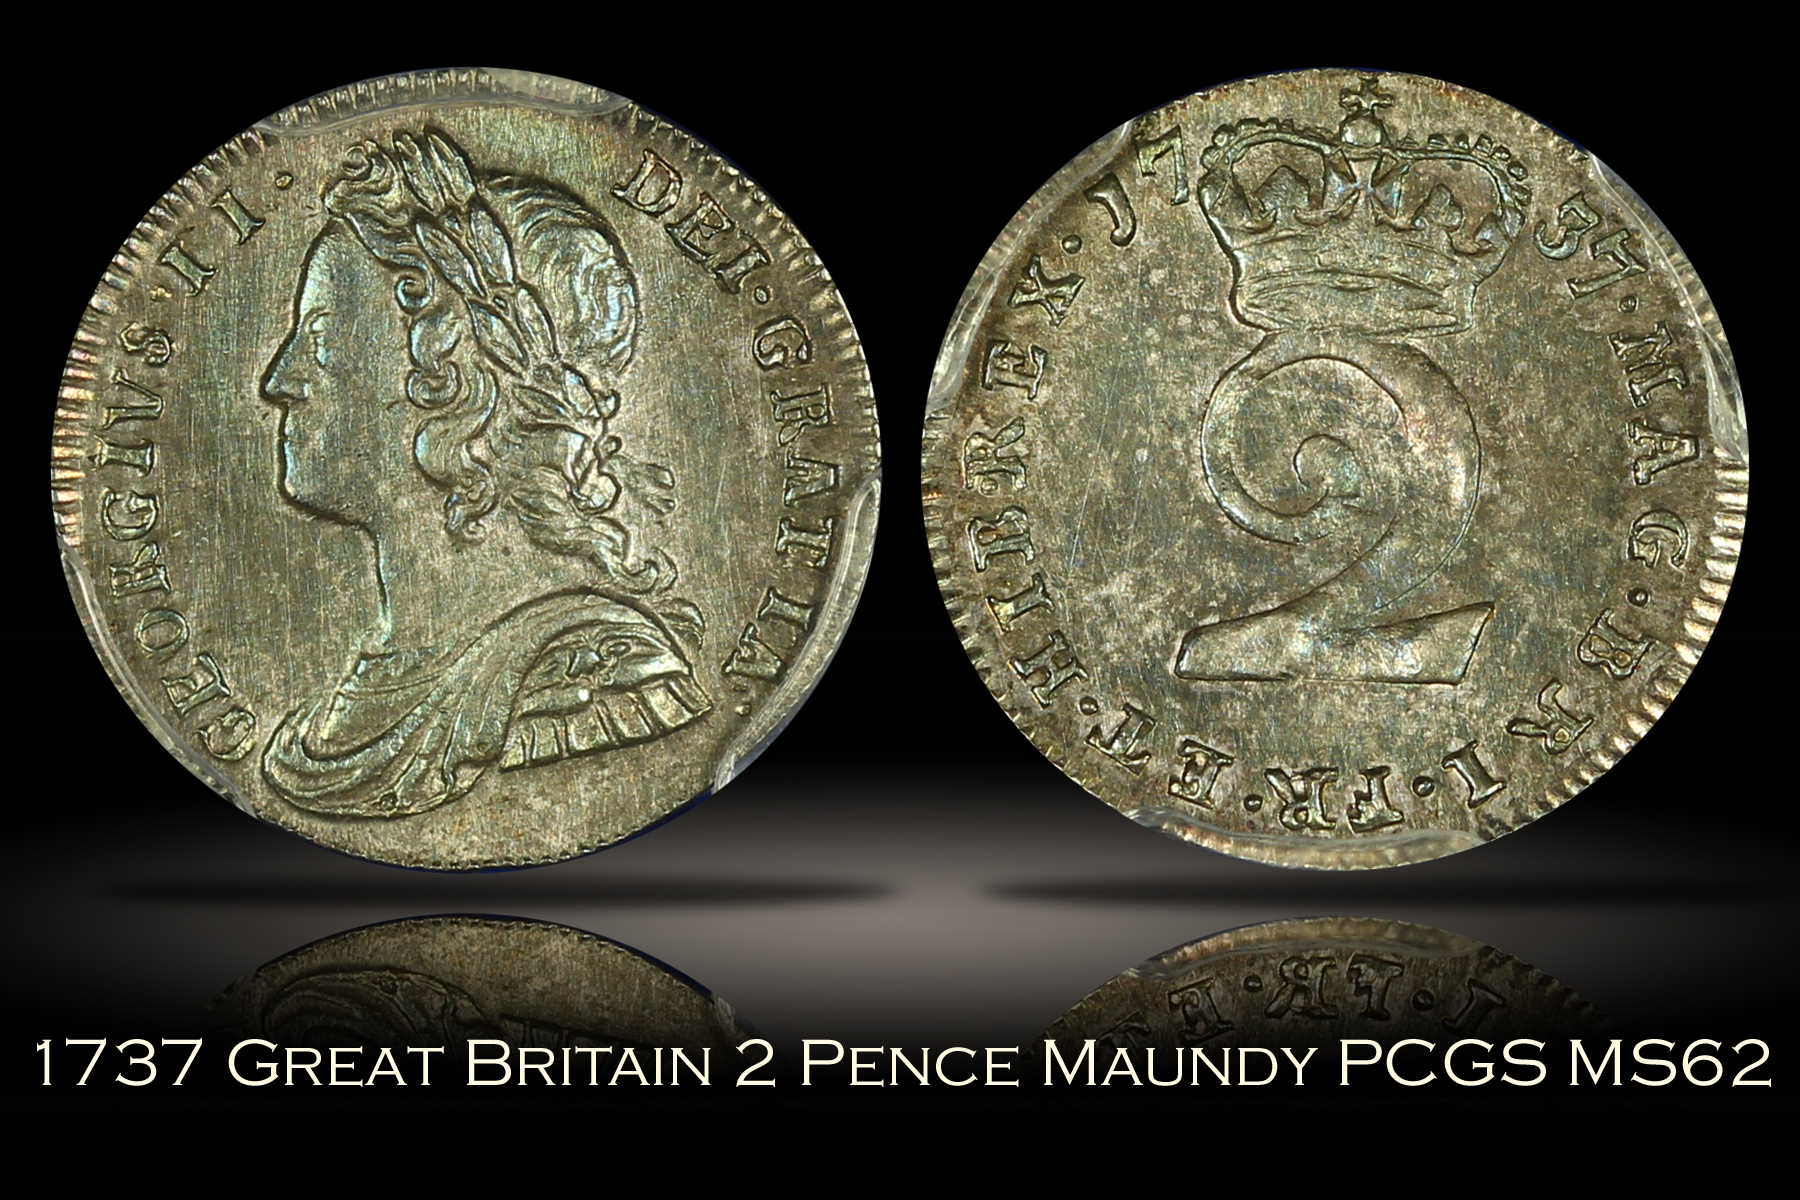 1737 Great Britain 2 Pence Maundy PCGS MS62